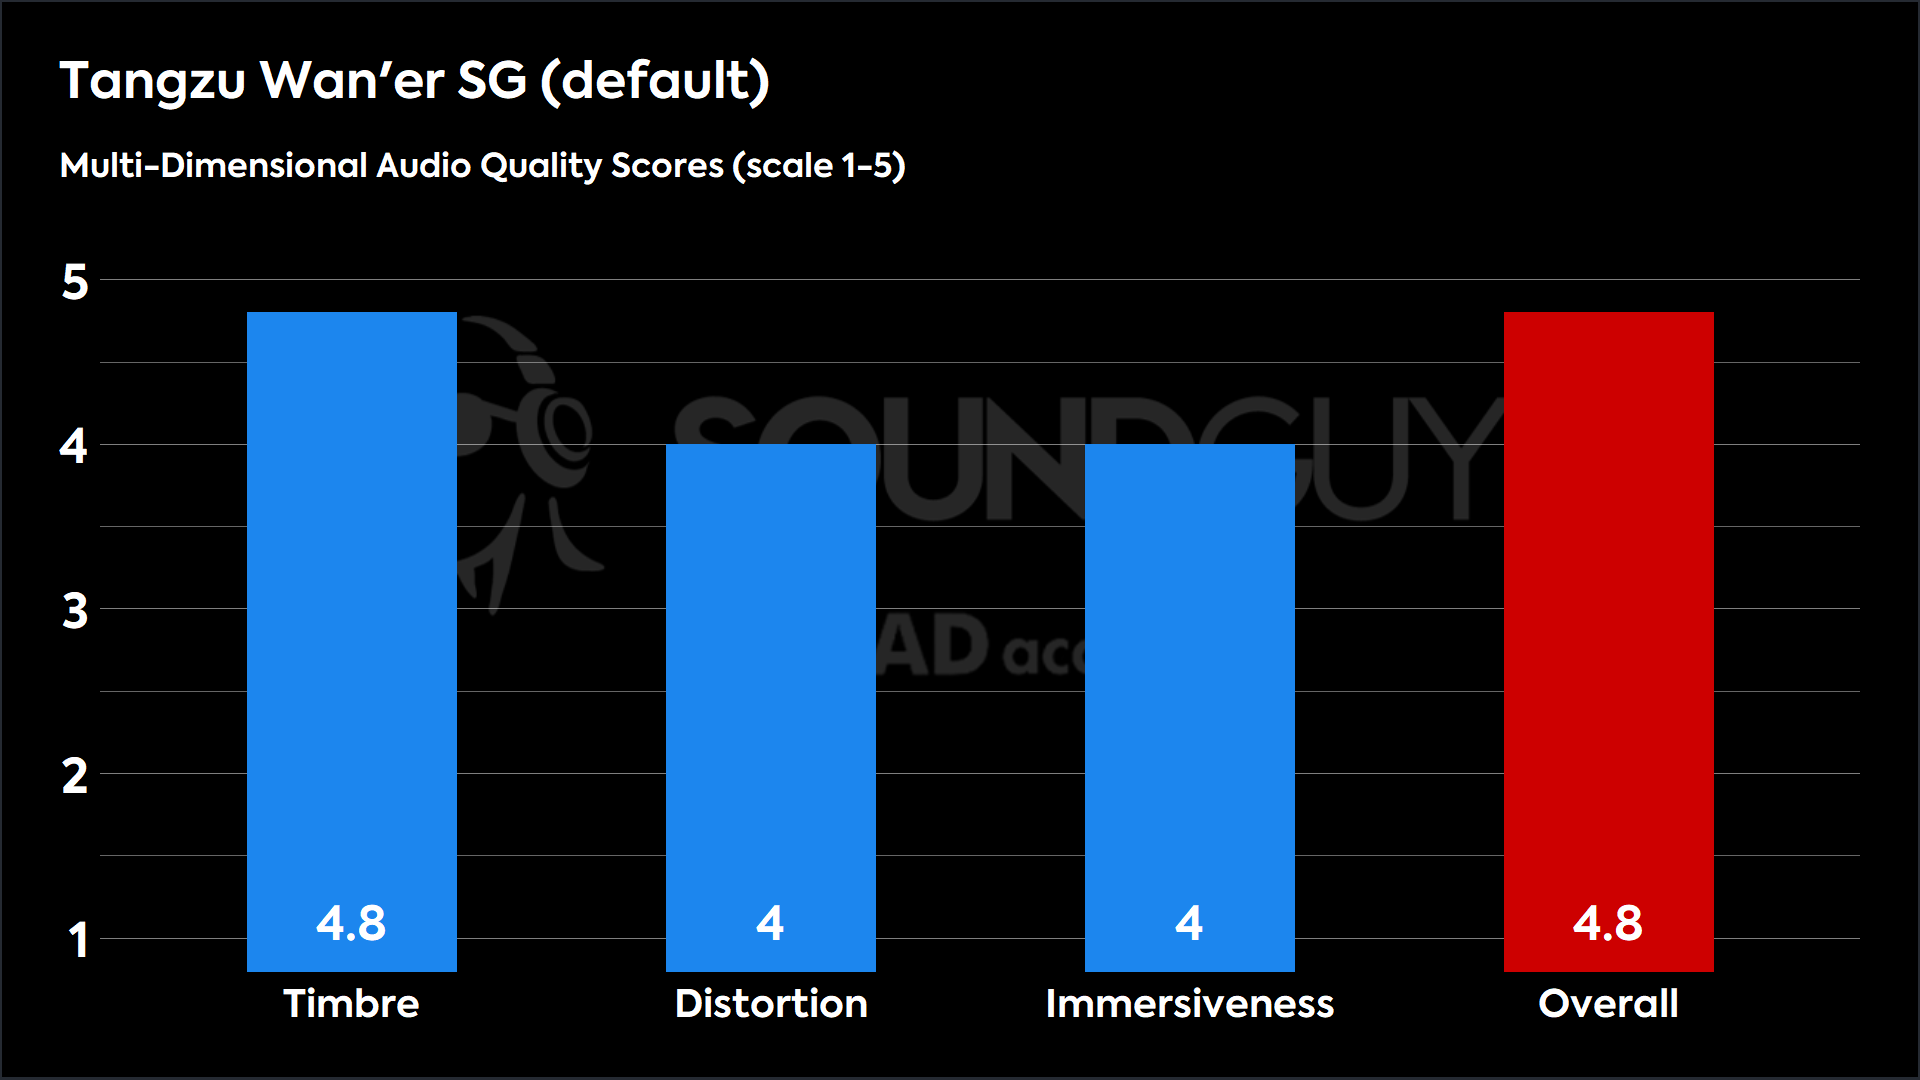 This chart shows the MDAQS results for the Tangzu Wan'er SG in default mode. The Timbre score is 4.8, The Distortion score is 4, the Immersiveness score is 4, and the Overall Score is 4.8).